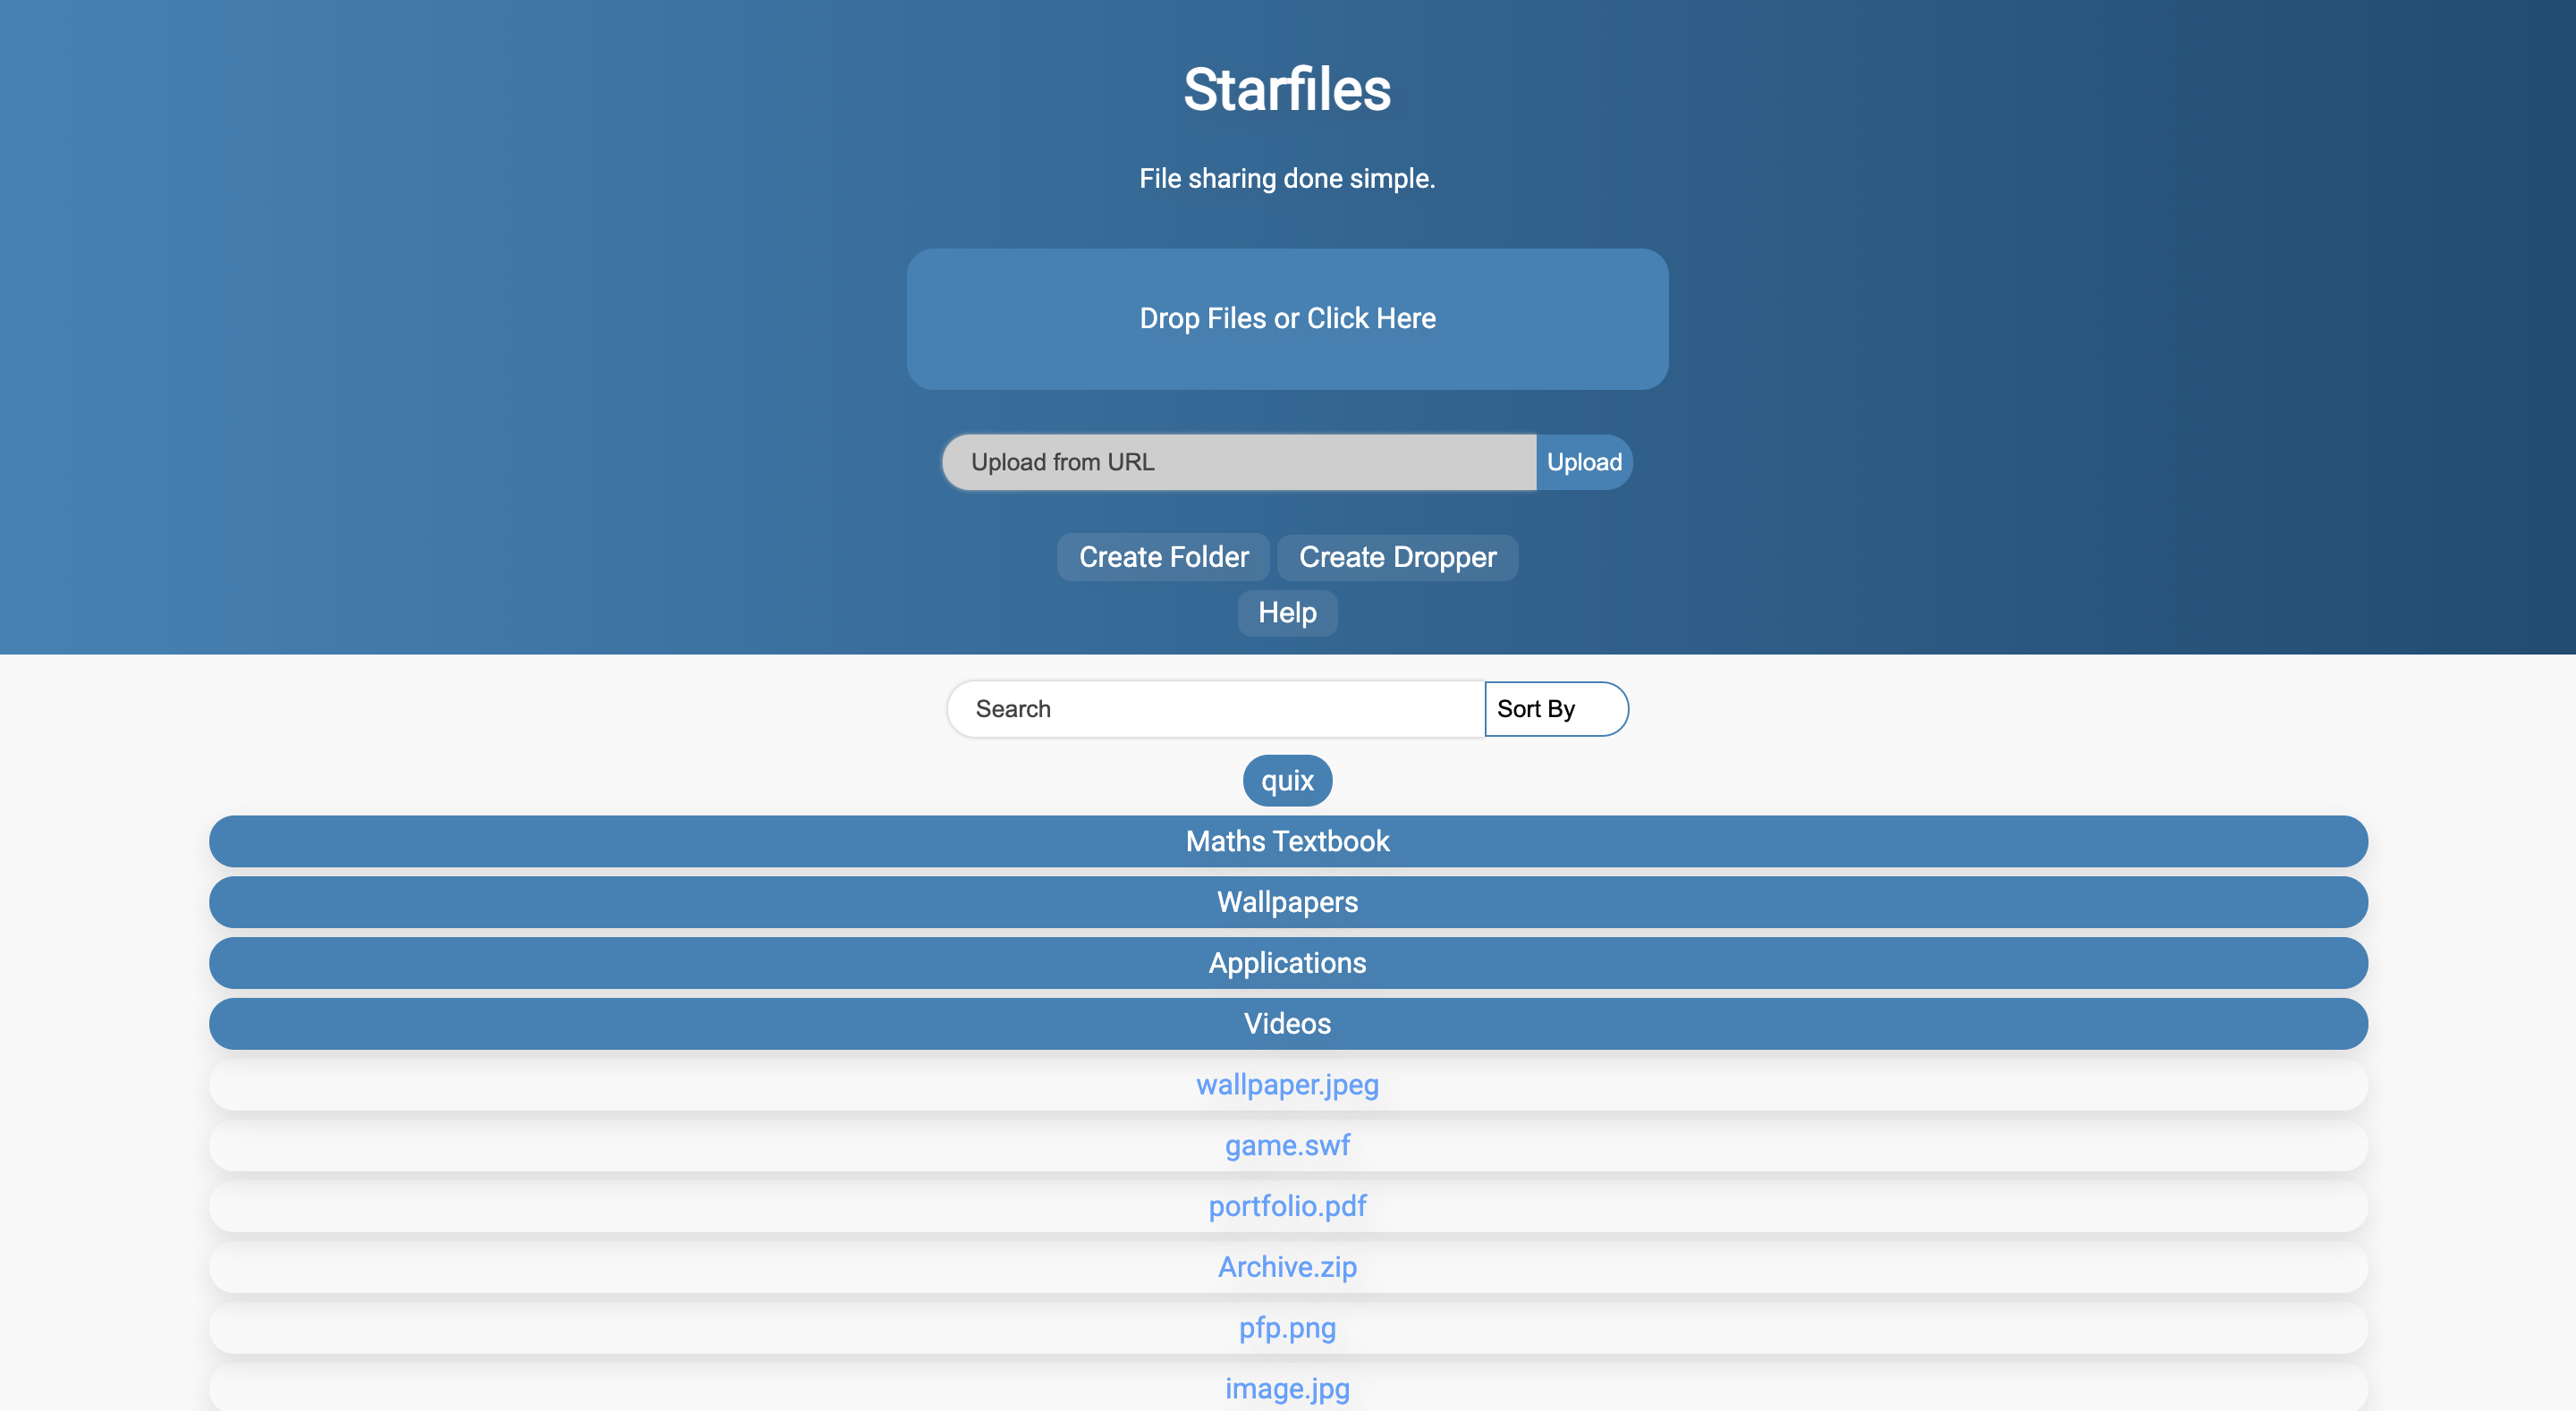 Find detailed information about Starfiles